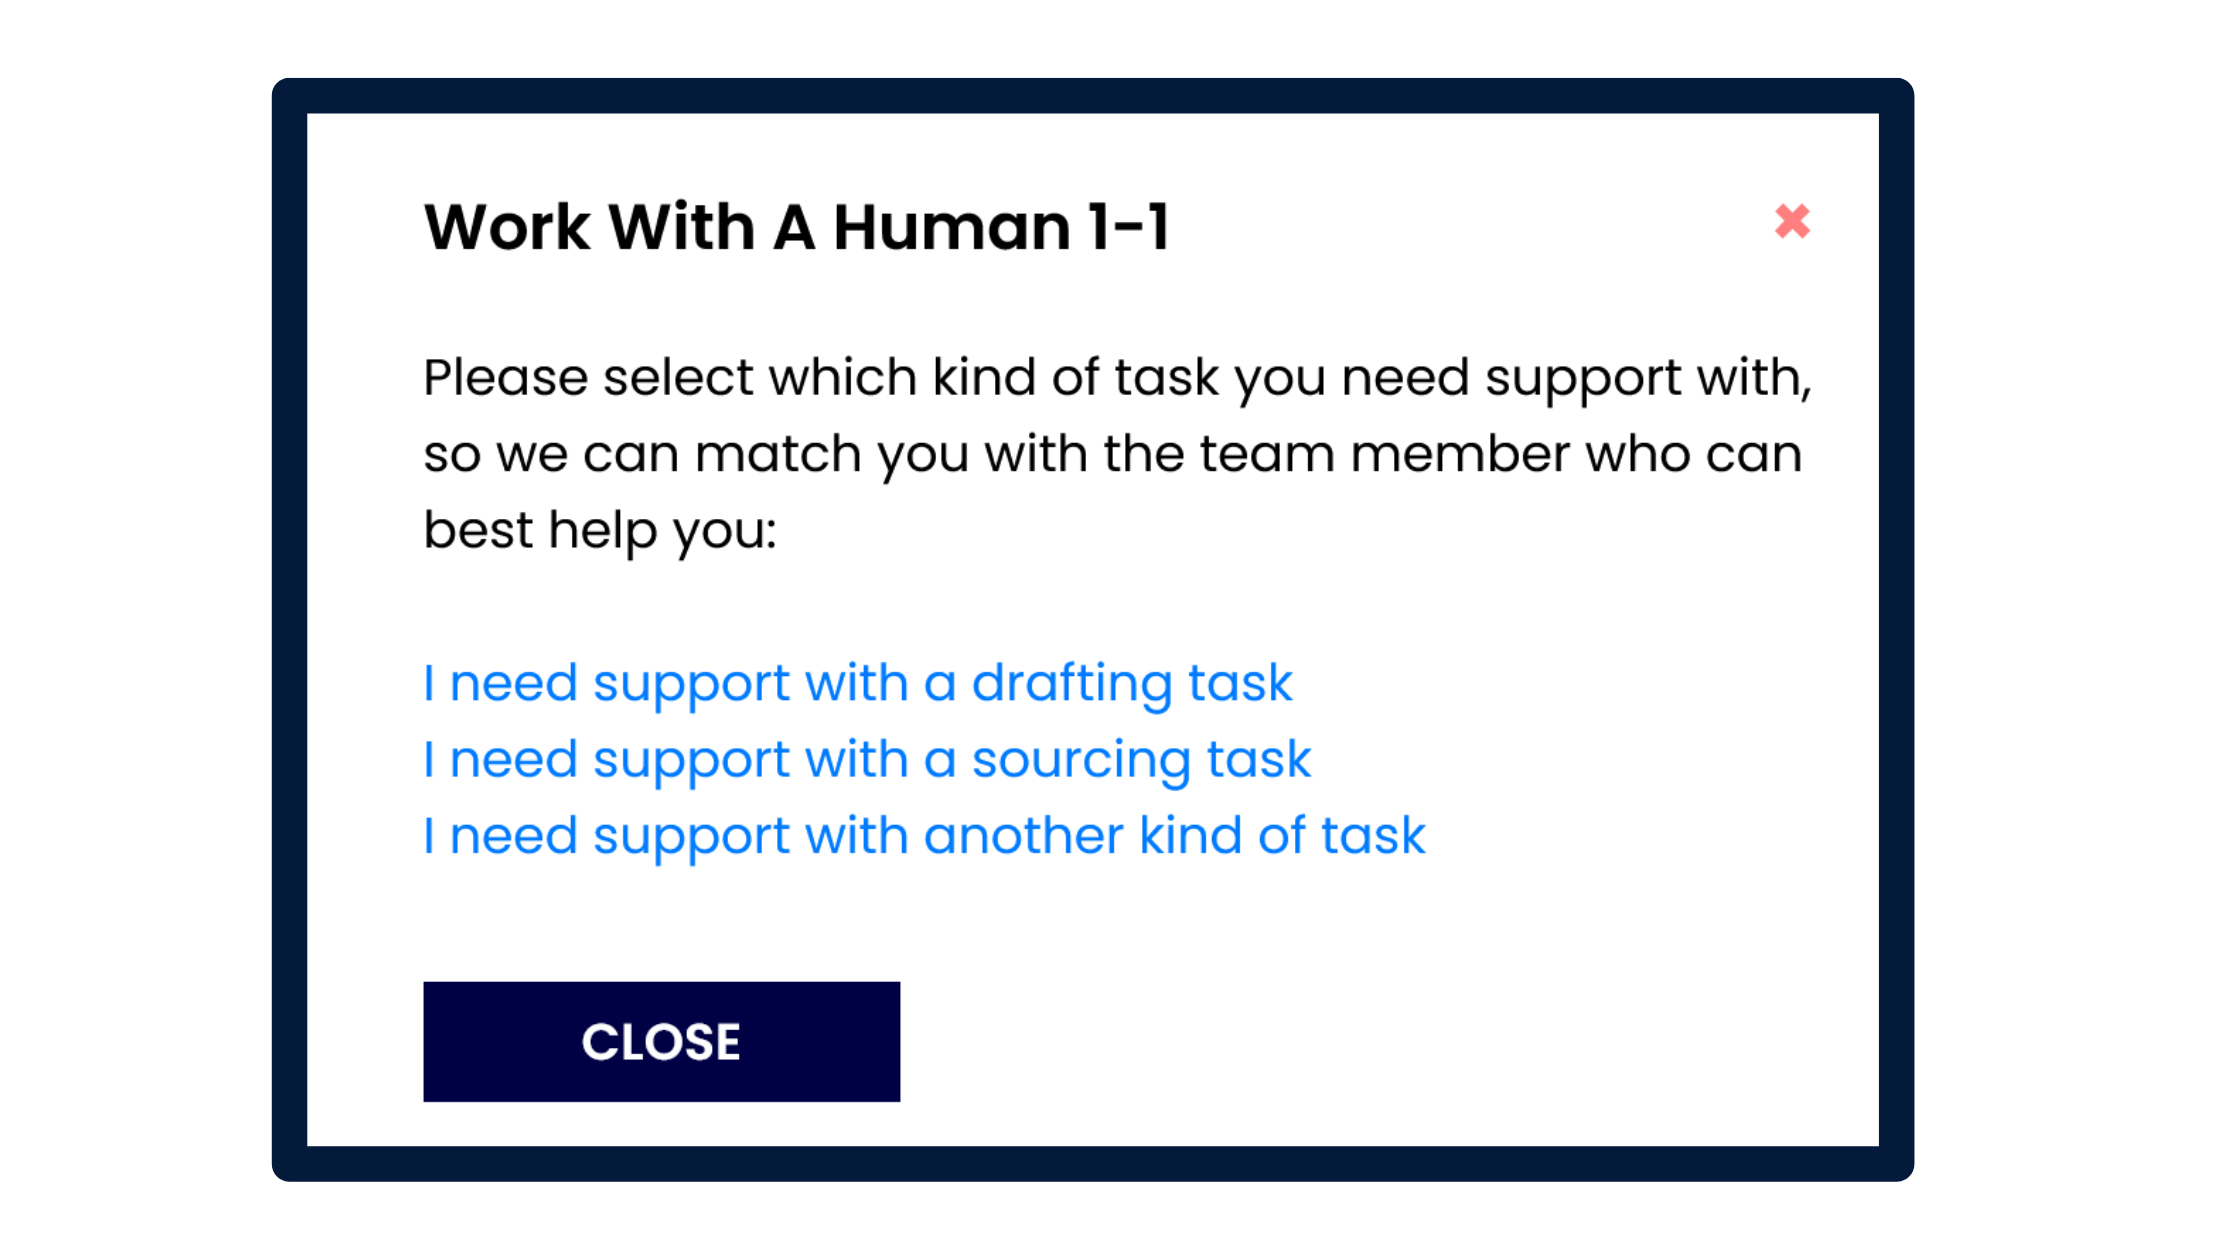 Work with a human 1:1